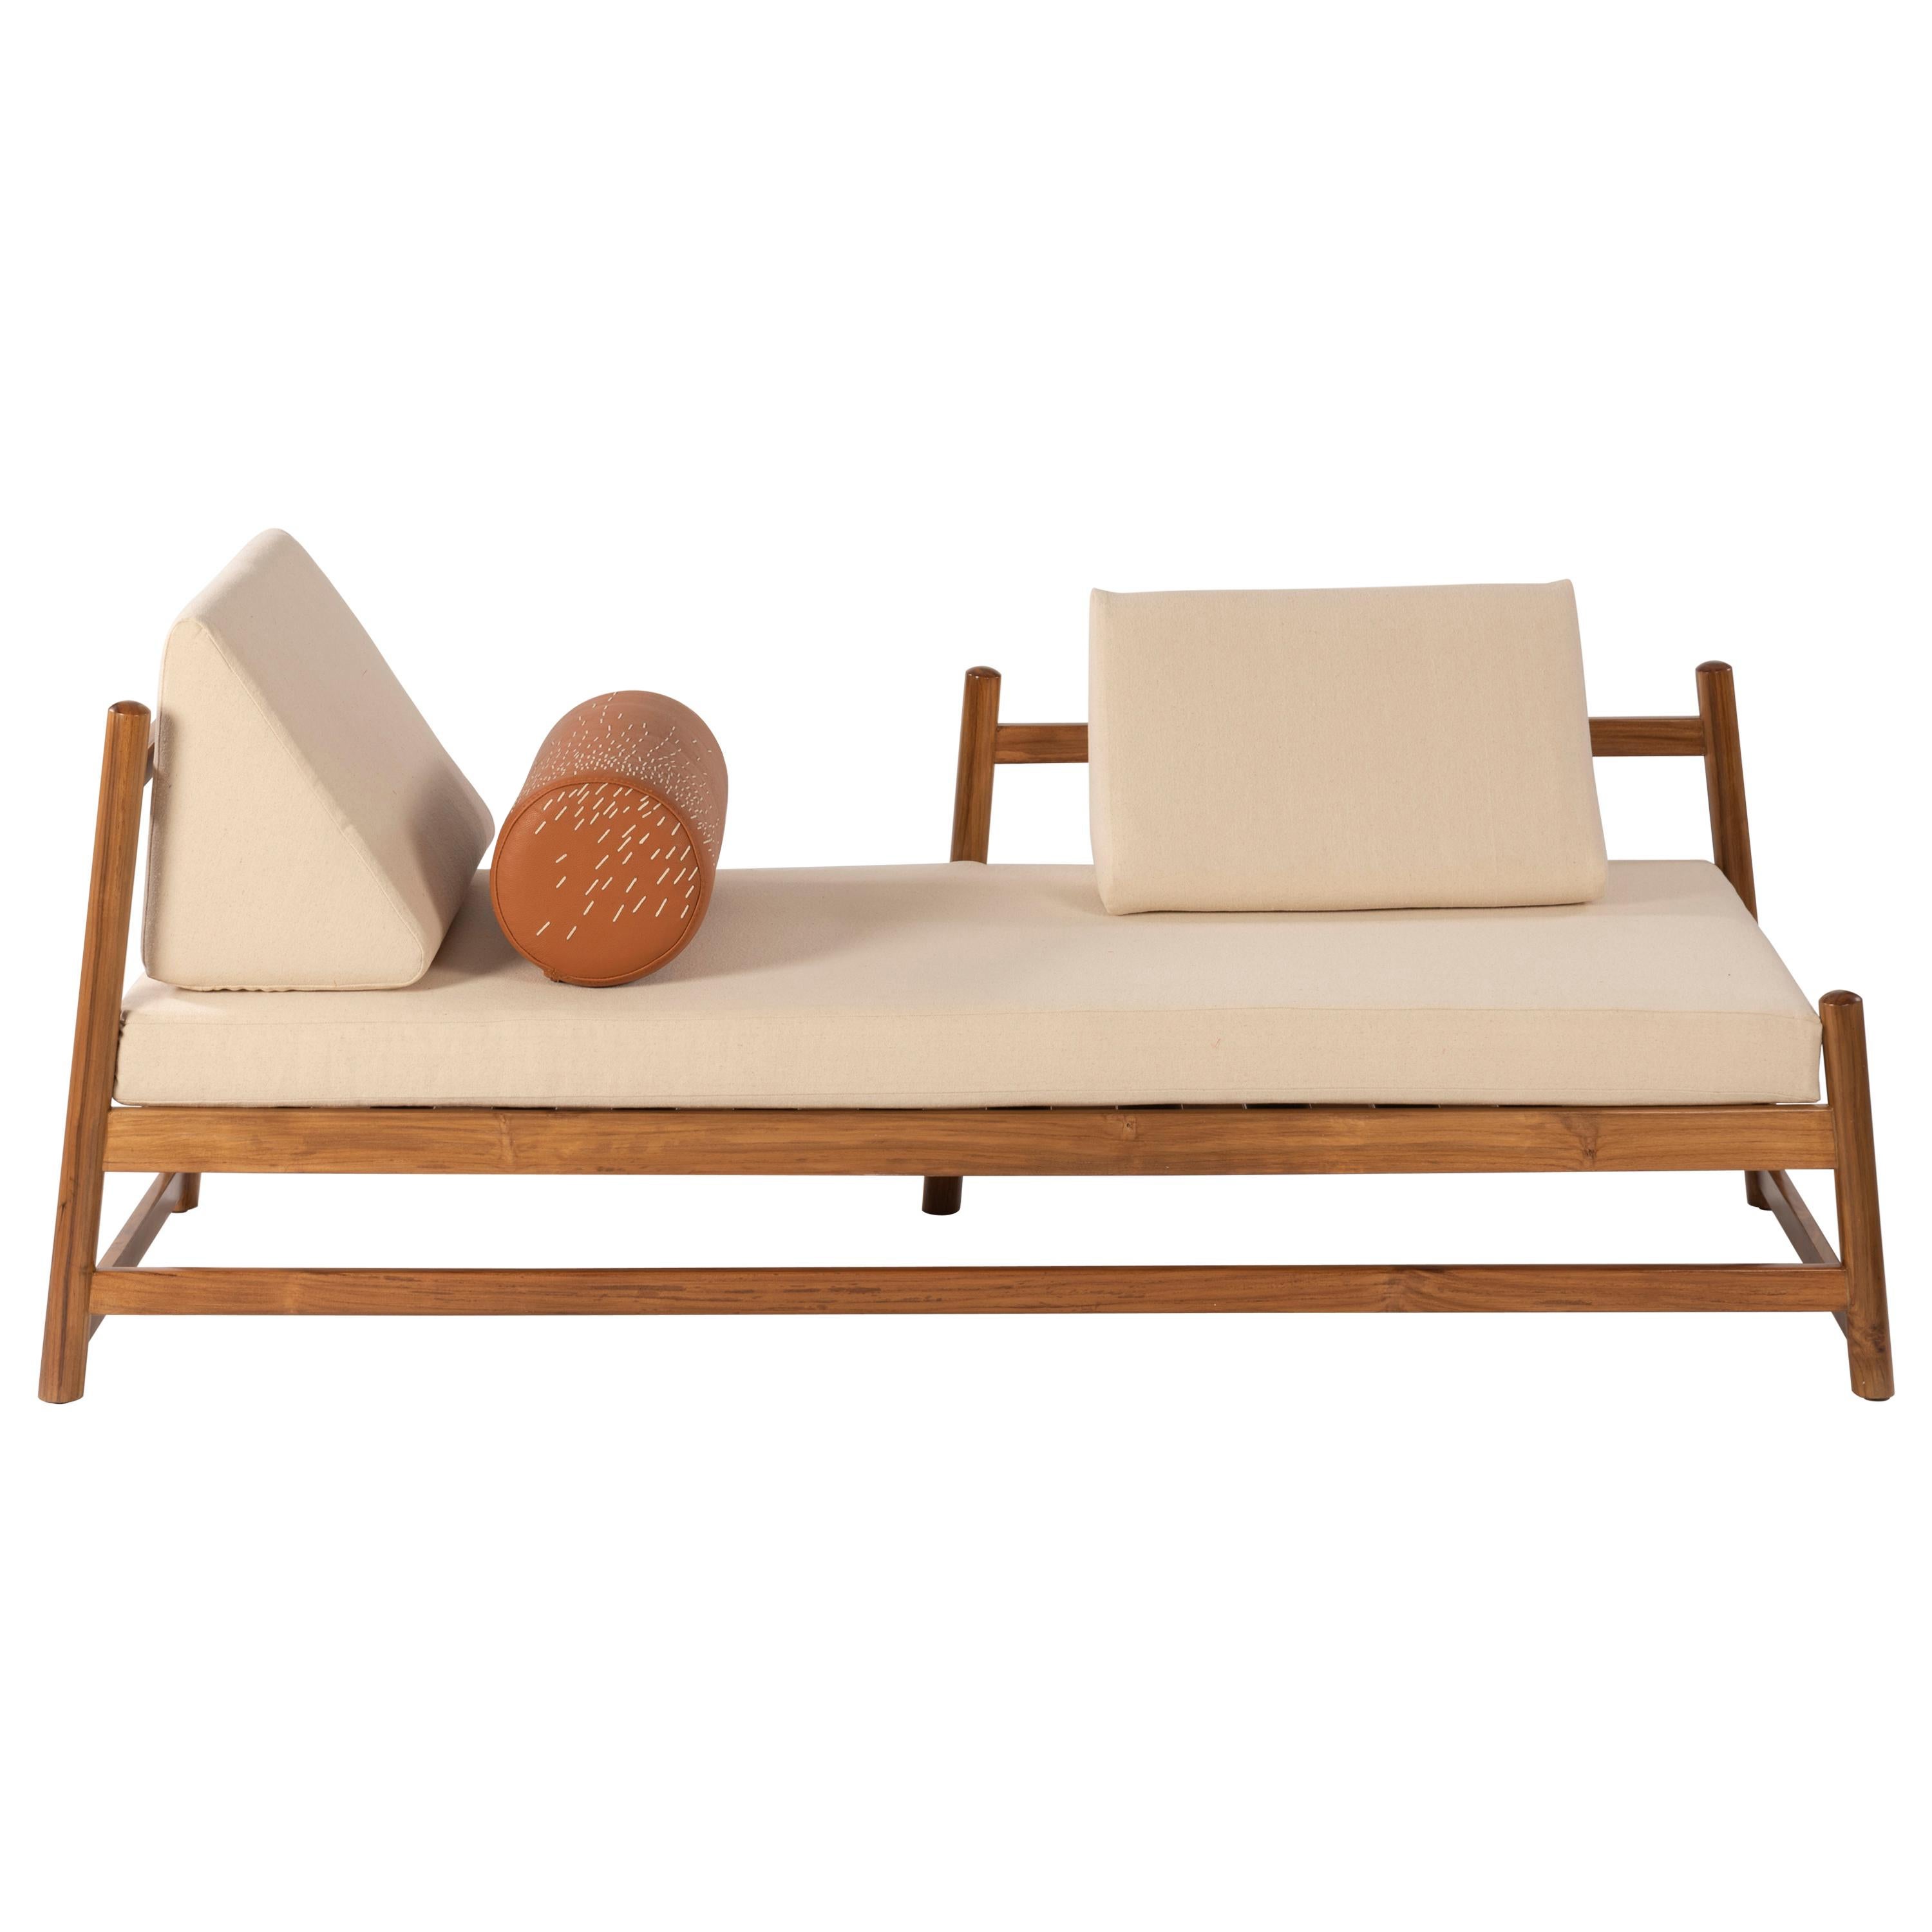 Pita Outdoors Daybed, Teak Wood and Sunbrella For Sale